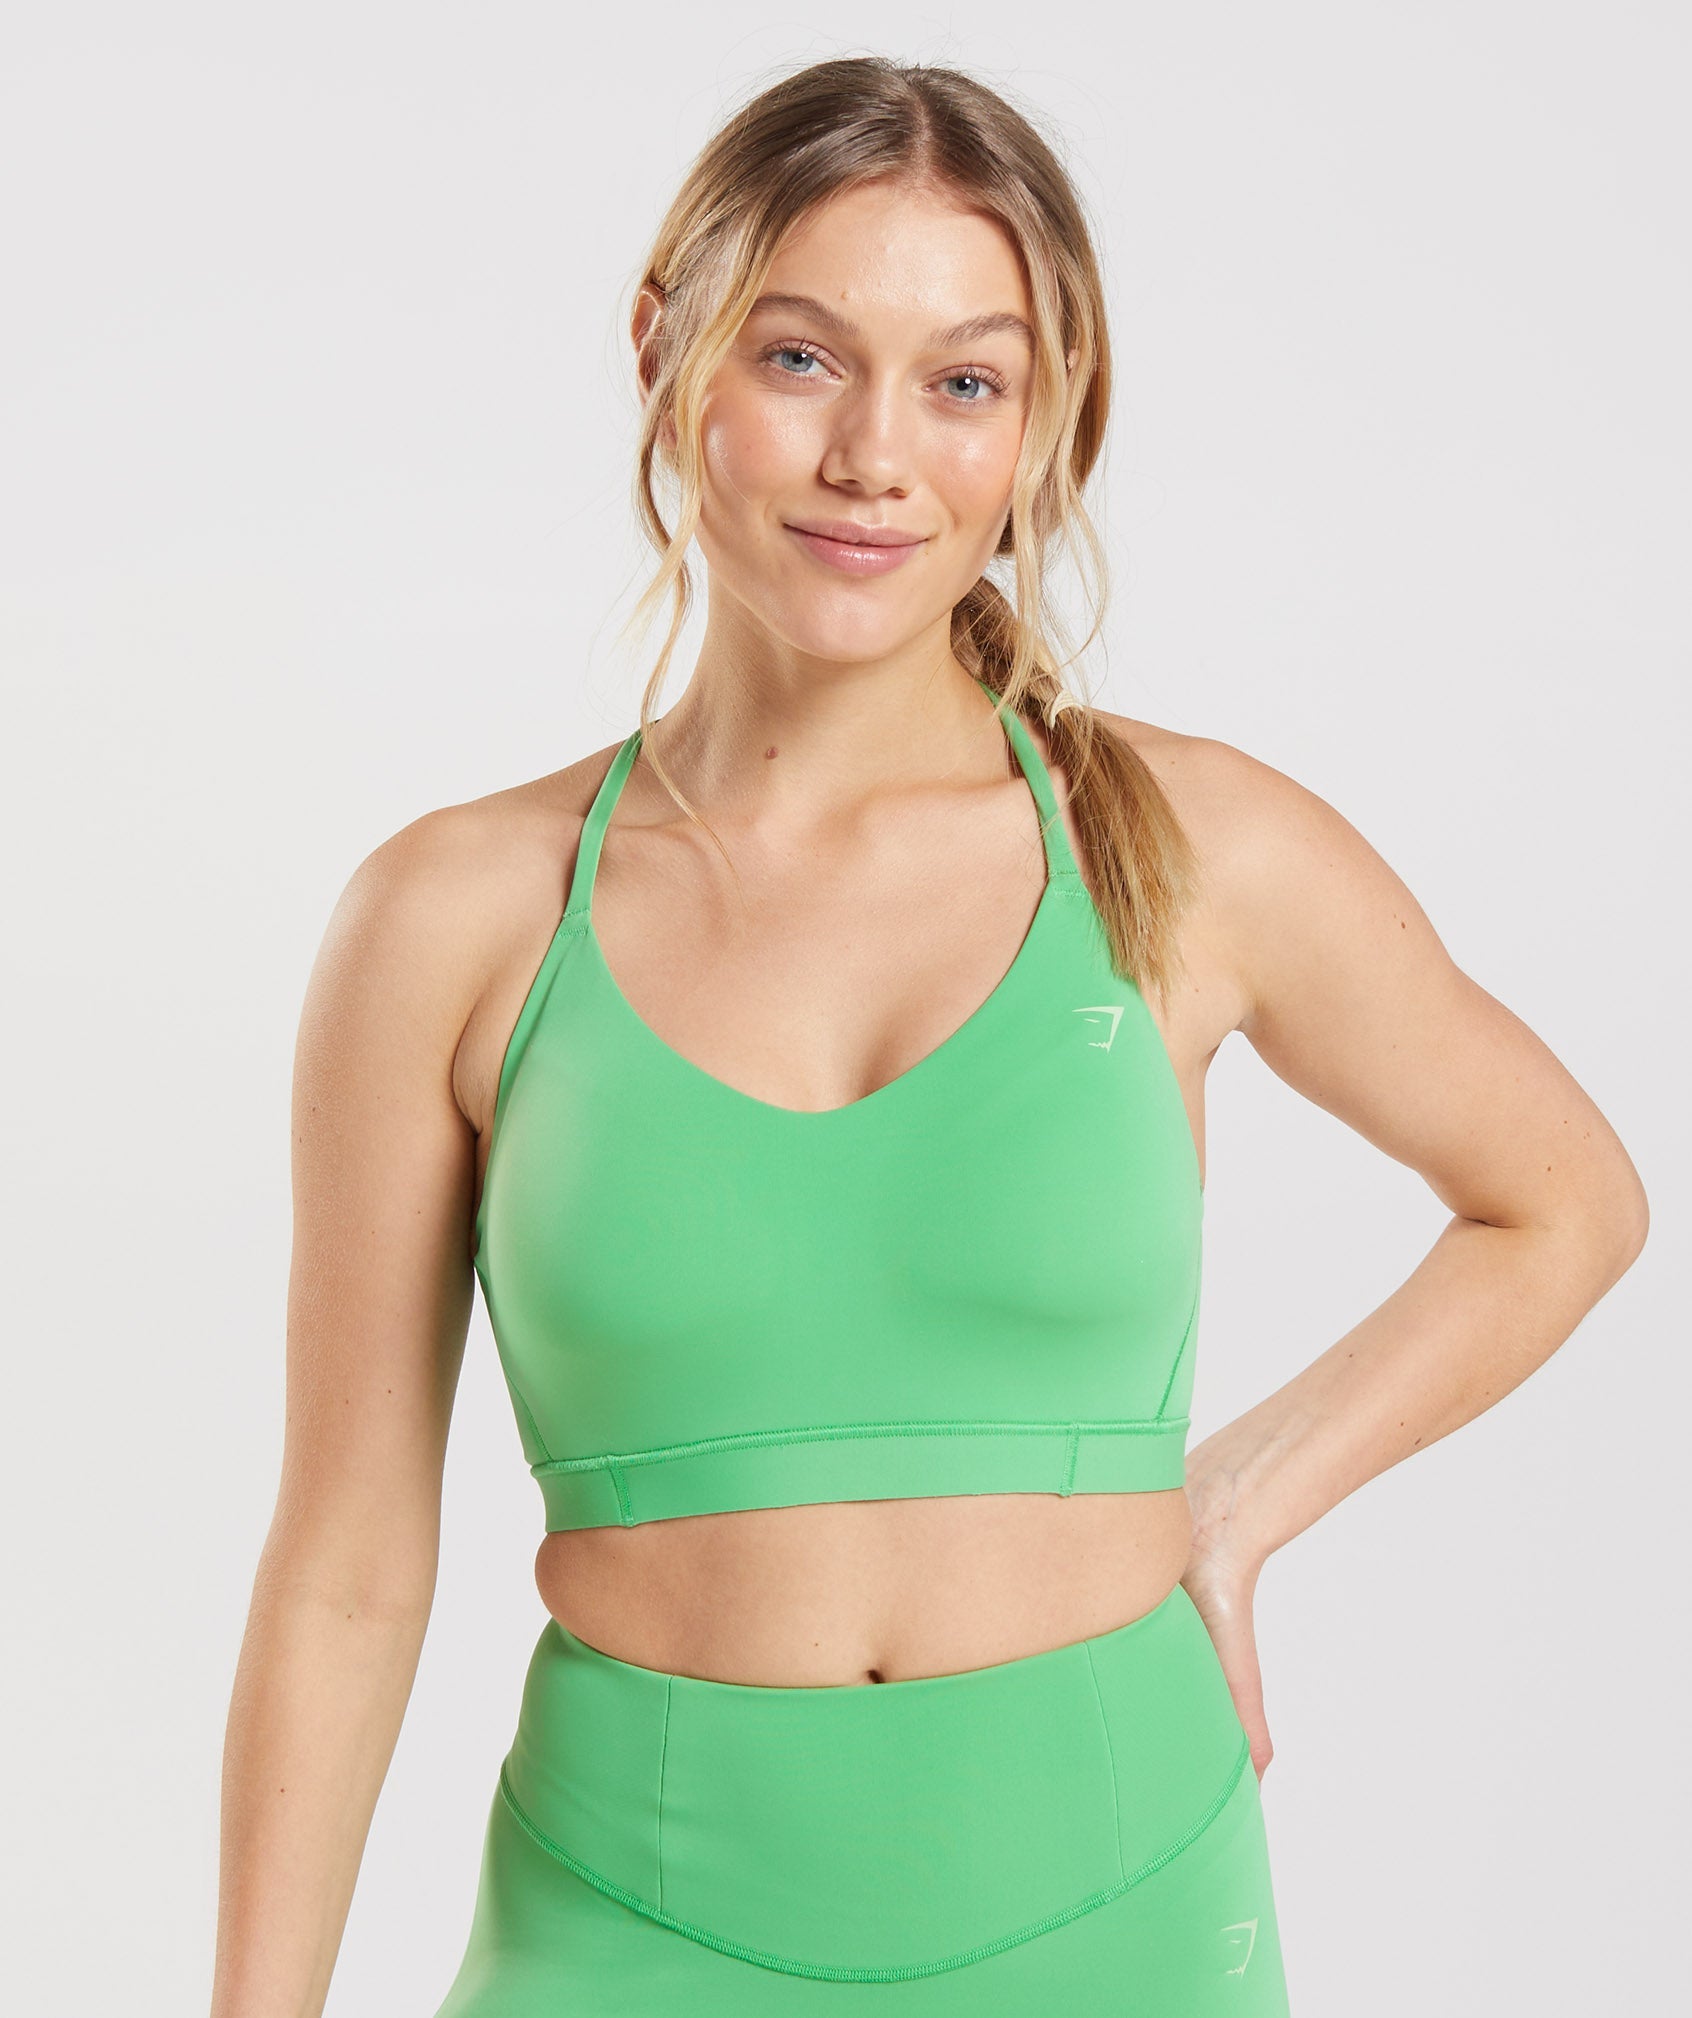 Gymshark Illumination Seamless Sports Bra Black Size M - $31 (22% Off  Retail) New With Tags - From Mario